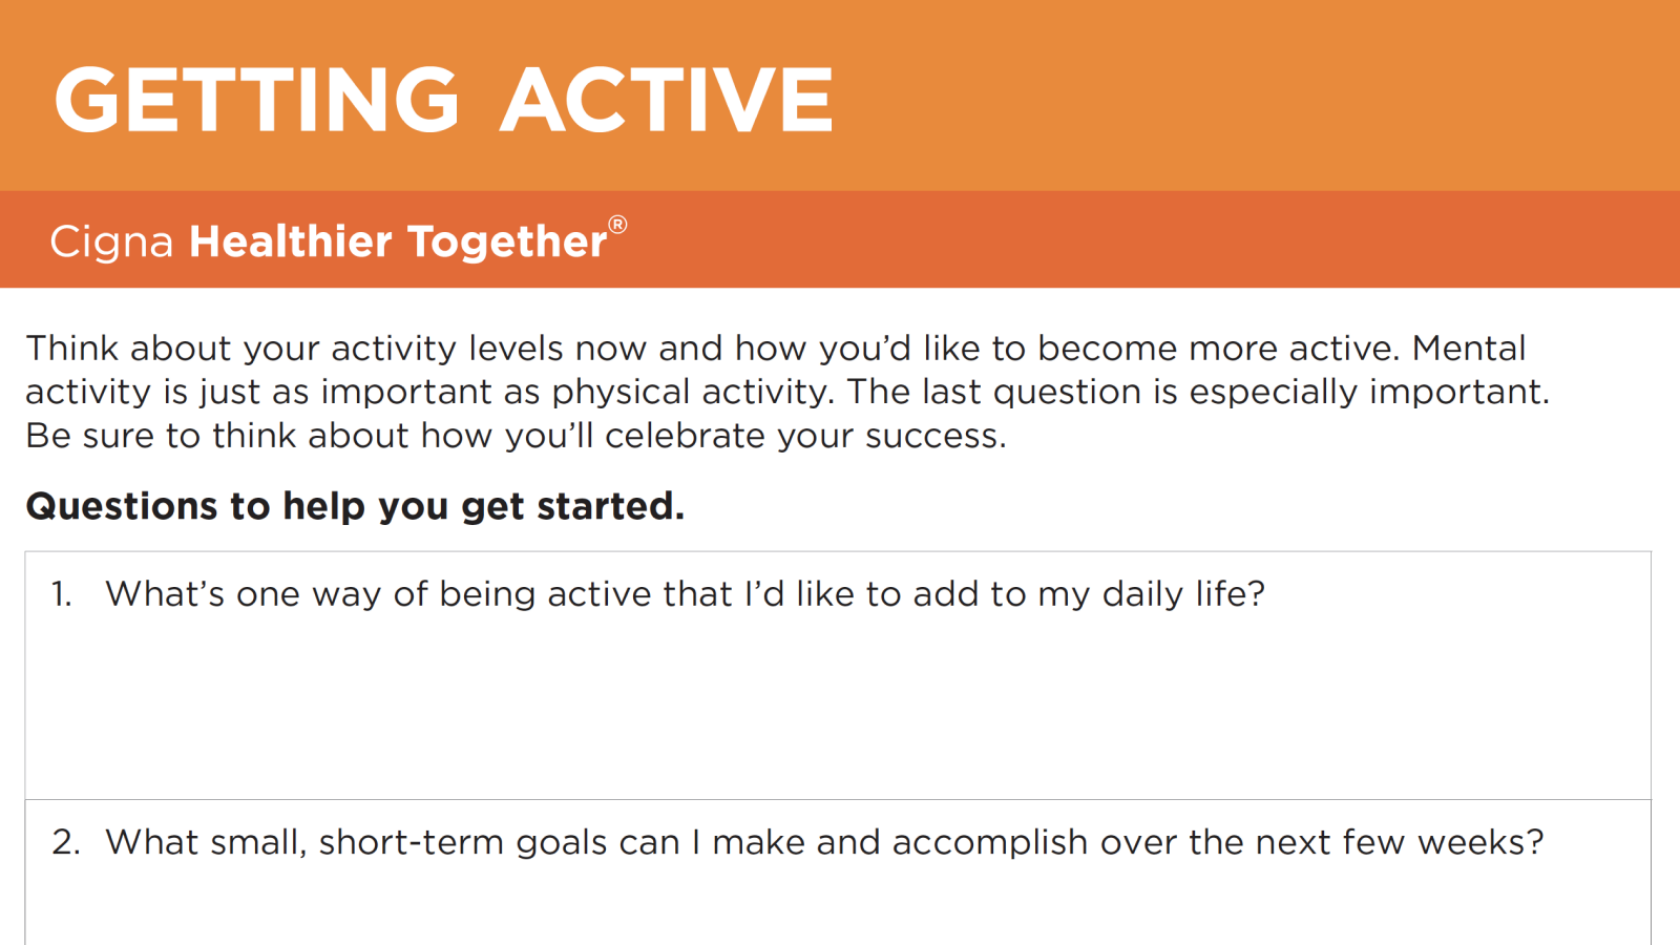 Getting Active flyer